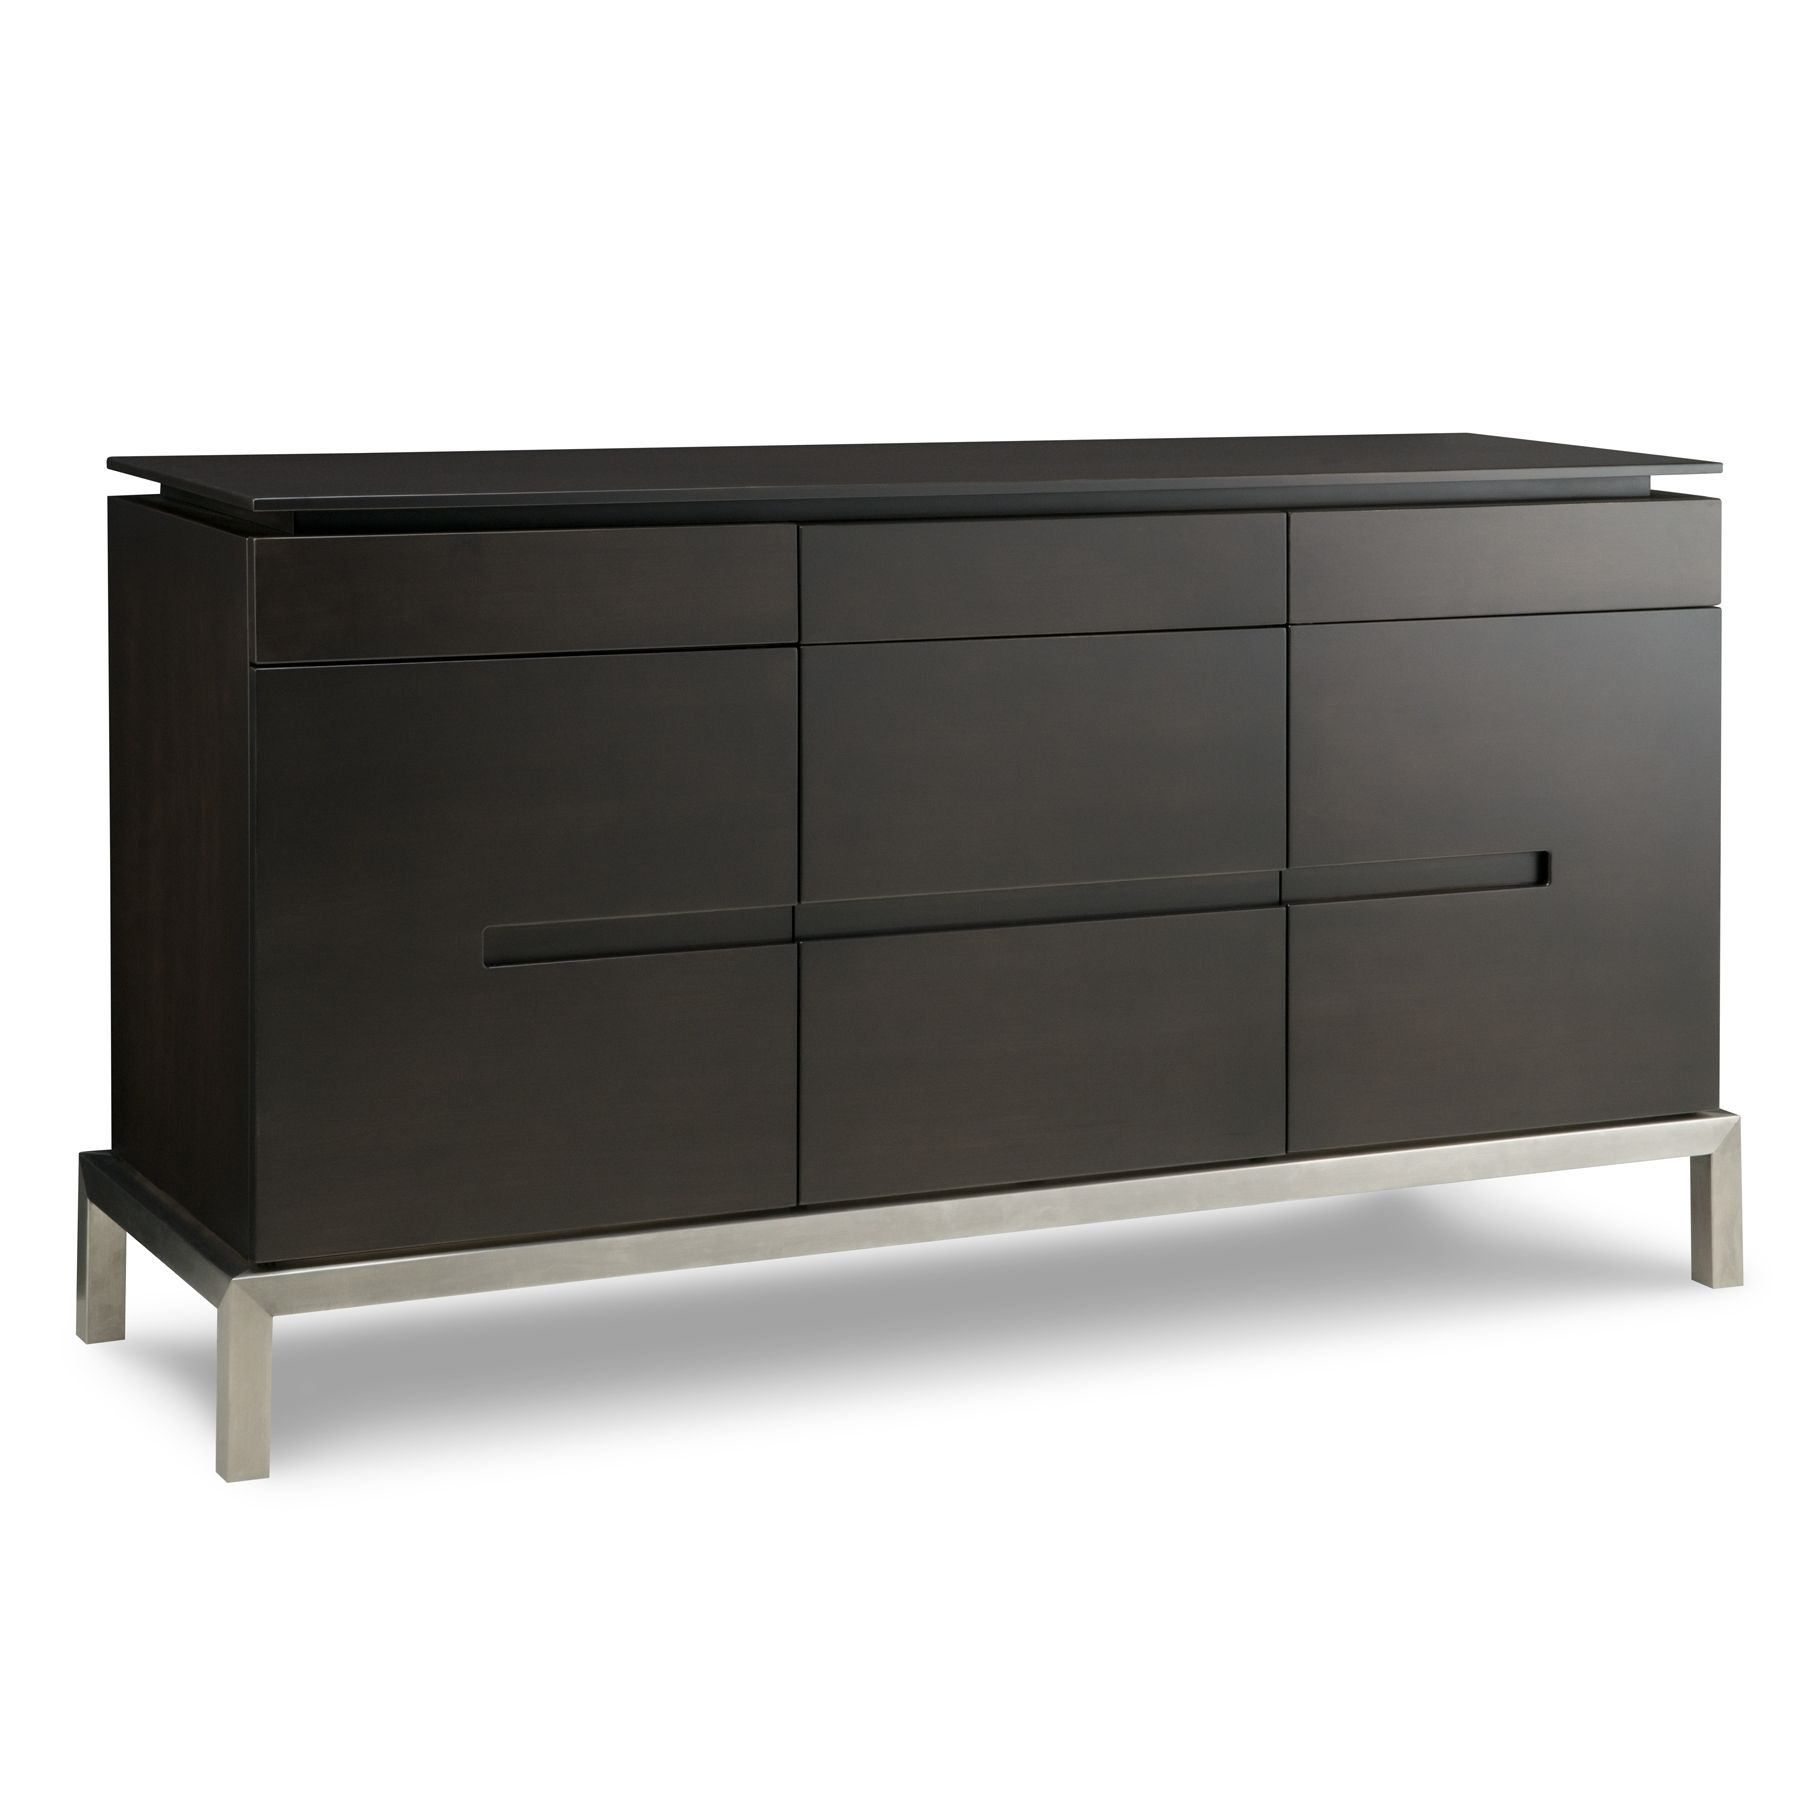 Wood Sideboards Toronto | Solid Wooden Sideboard | Woodcraft Throughout Parquet Sideboards (View 30 of 30)